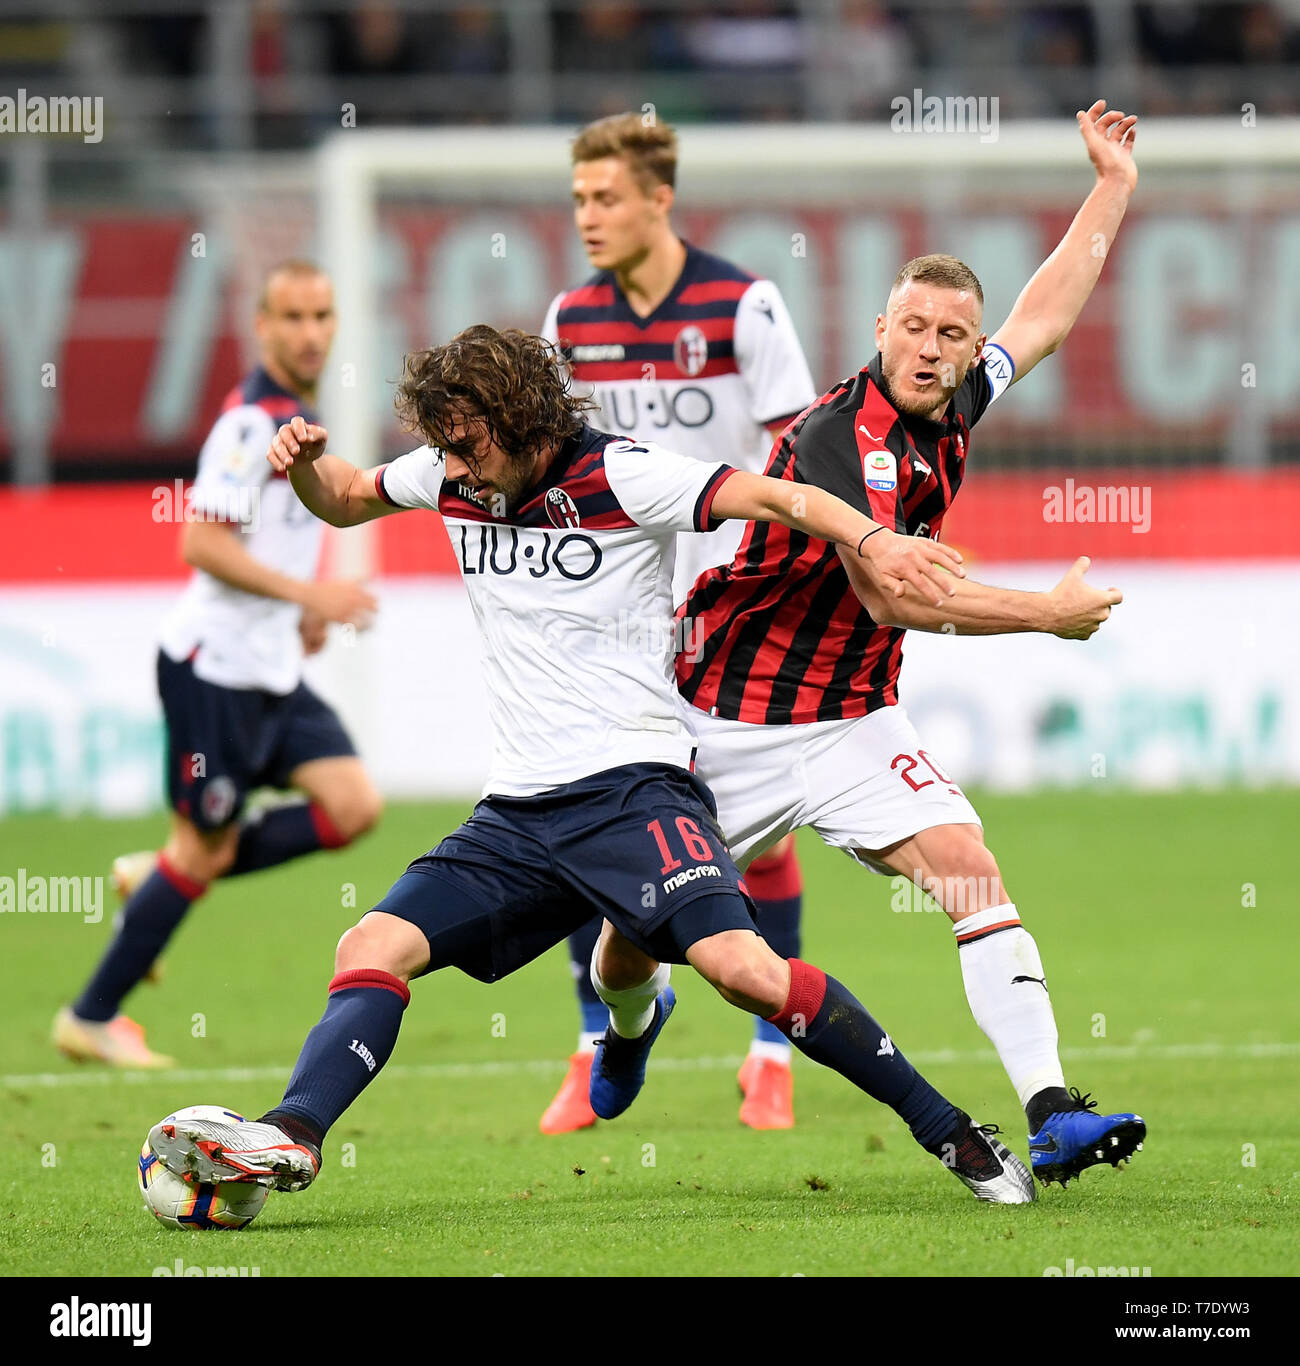 Milan, Italy. 6th May, 2019. AC Milan's Ignazio Abate (R) vies with Bologna's Andrea Poli during a Serie A soccer match between AC Milan and Bologna in Milan, Italy, May 6, 2019. AC Milan won 2-1. Credit: Daniele Mascolo/Xinhua/Alamy Live News Stock Photo